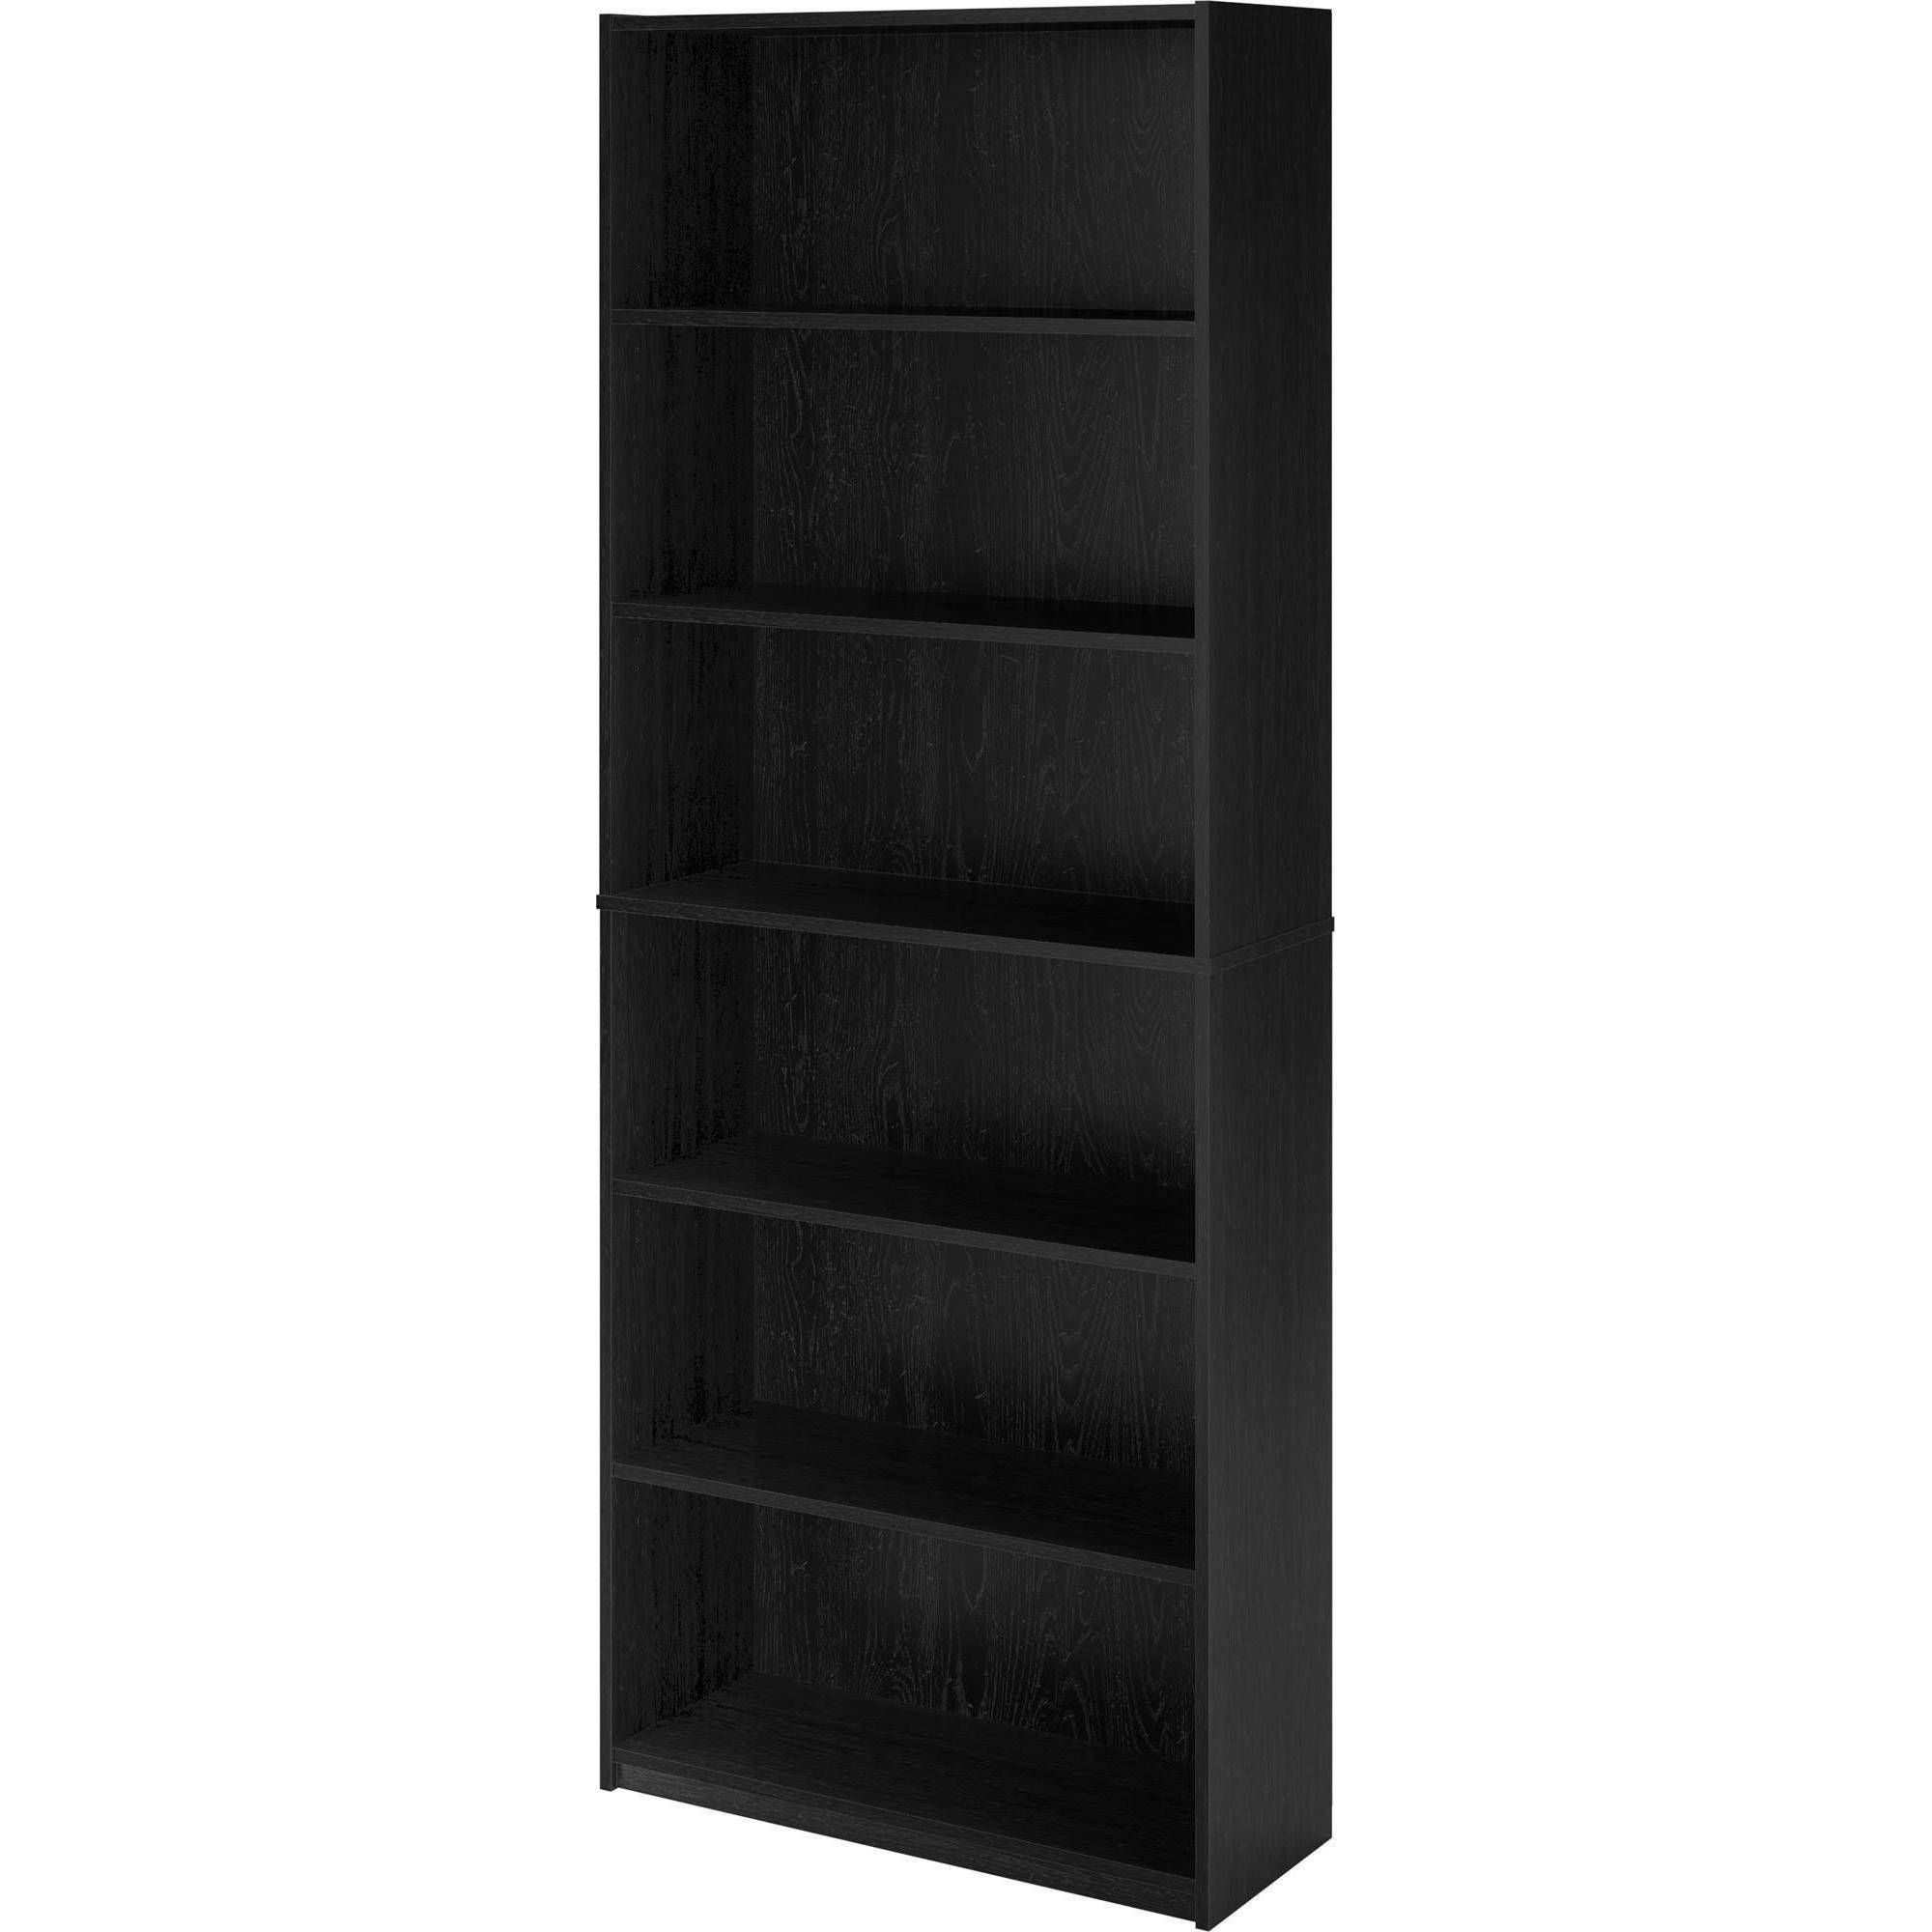 Latest Mainstays 6 Shelf Bookcase, Black Ebony Ash – Walmart Intended For Walmart Bookcases (View 14 of 15)